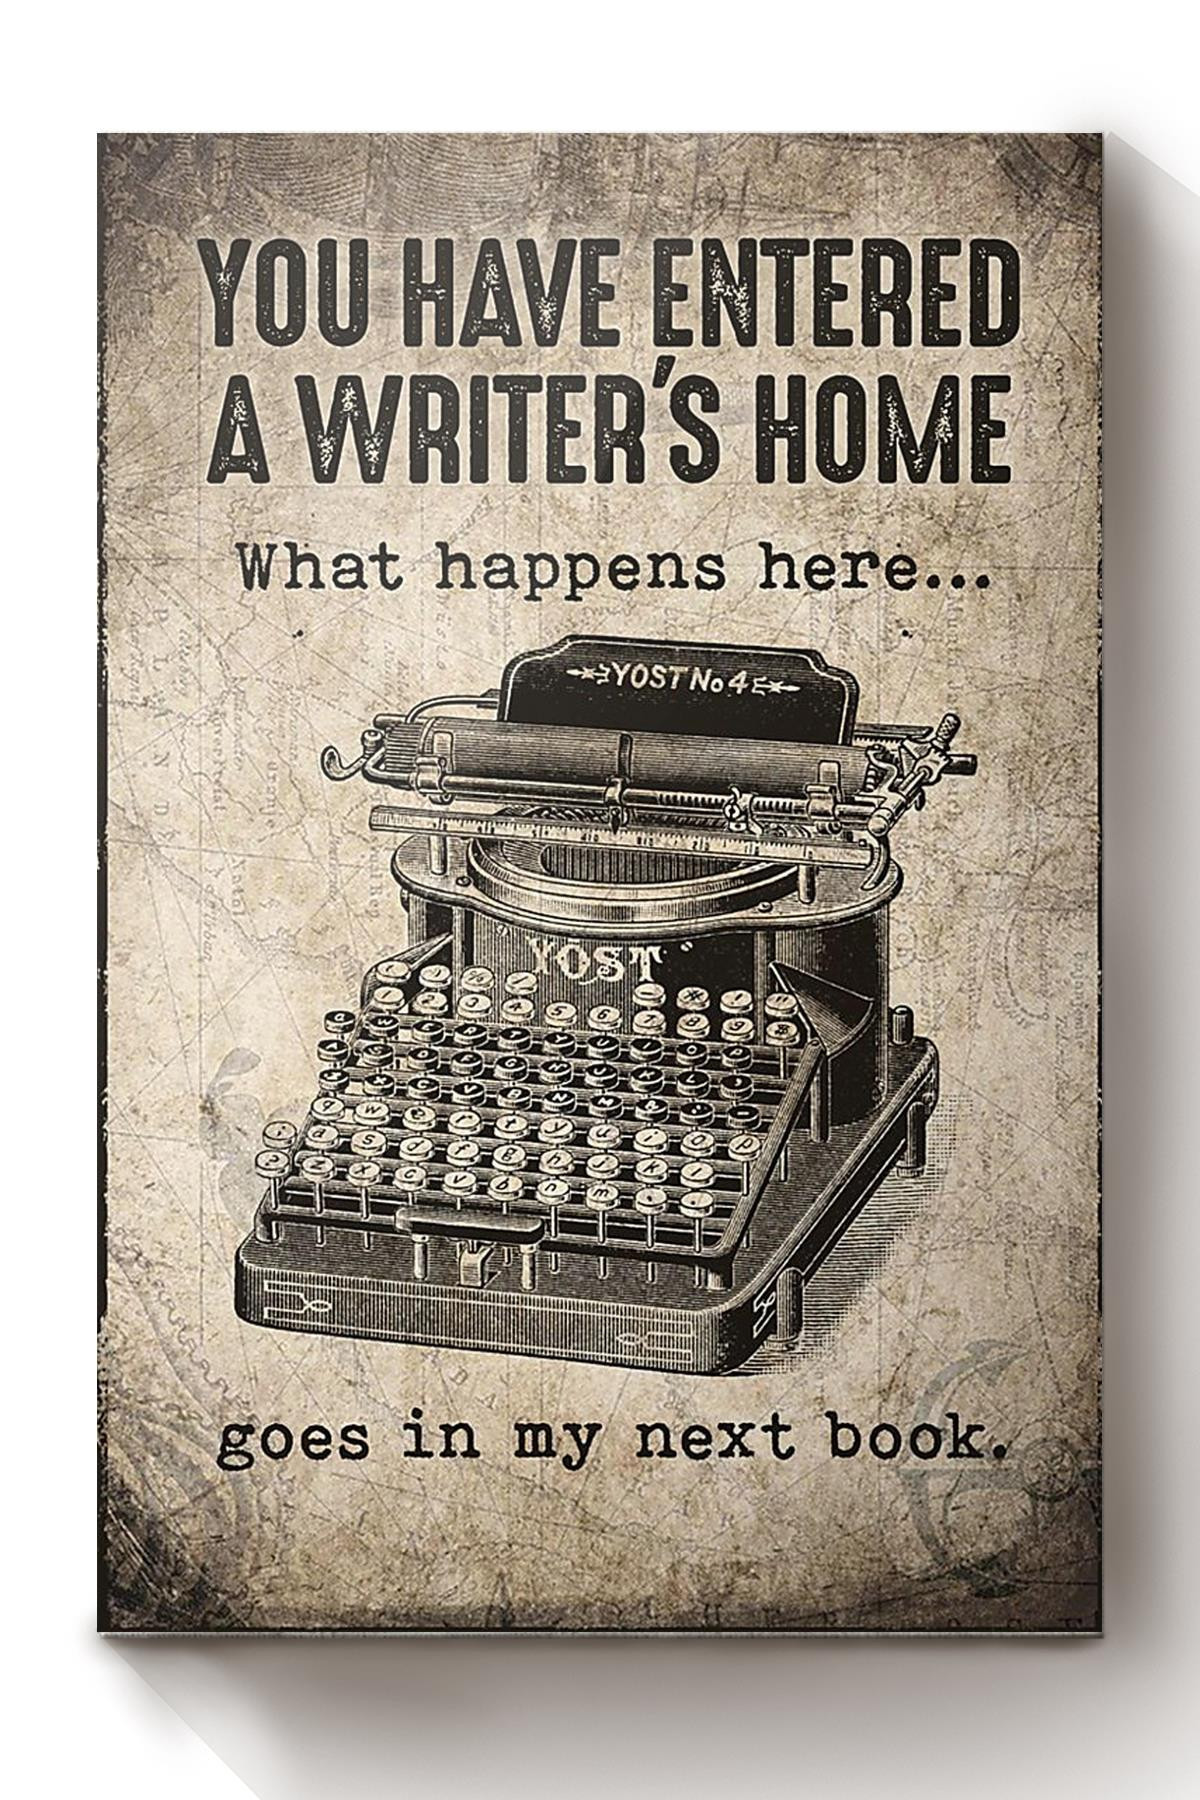 You Have Entered A Writer's Home Canvas For Working Room Office Decor Canvas Wrapped Canvas 8x10